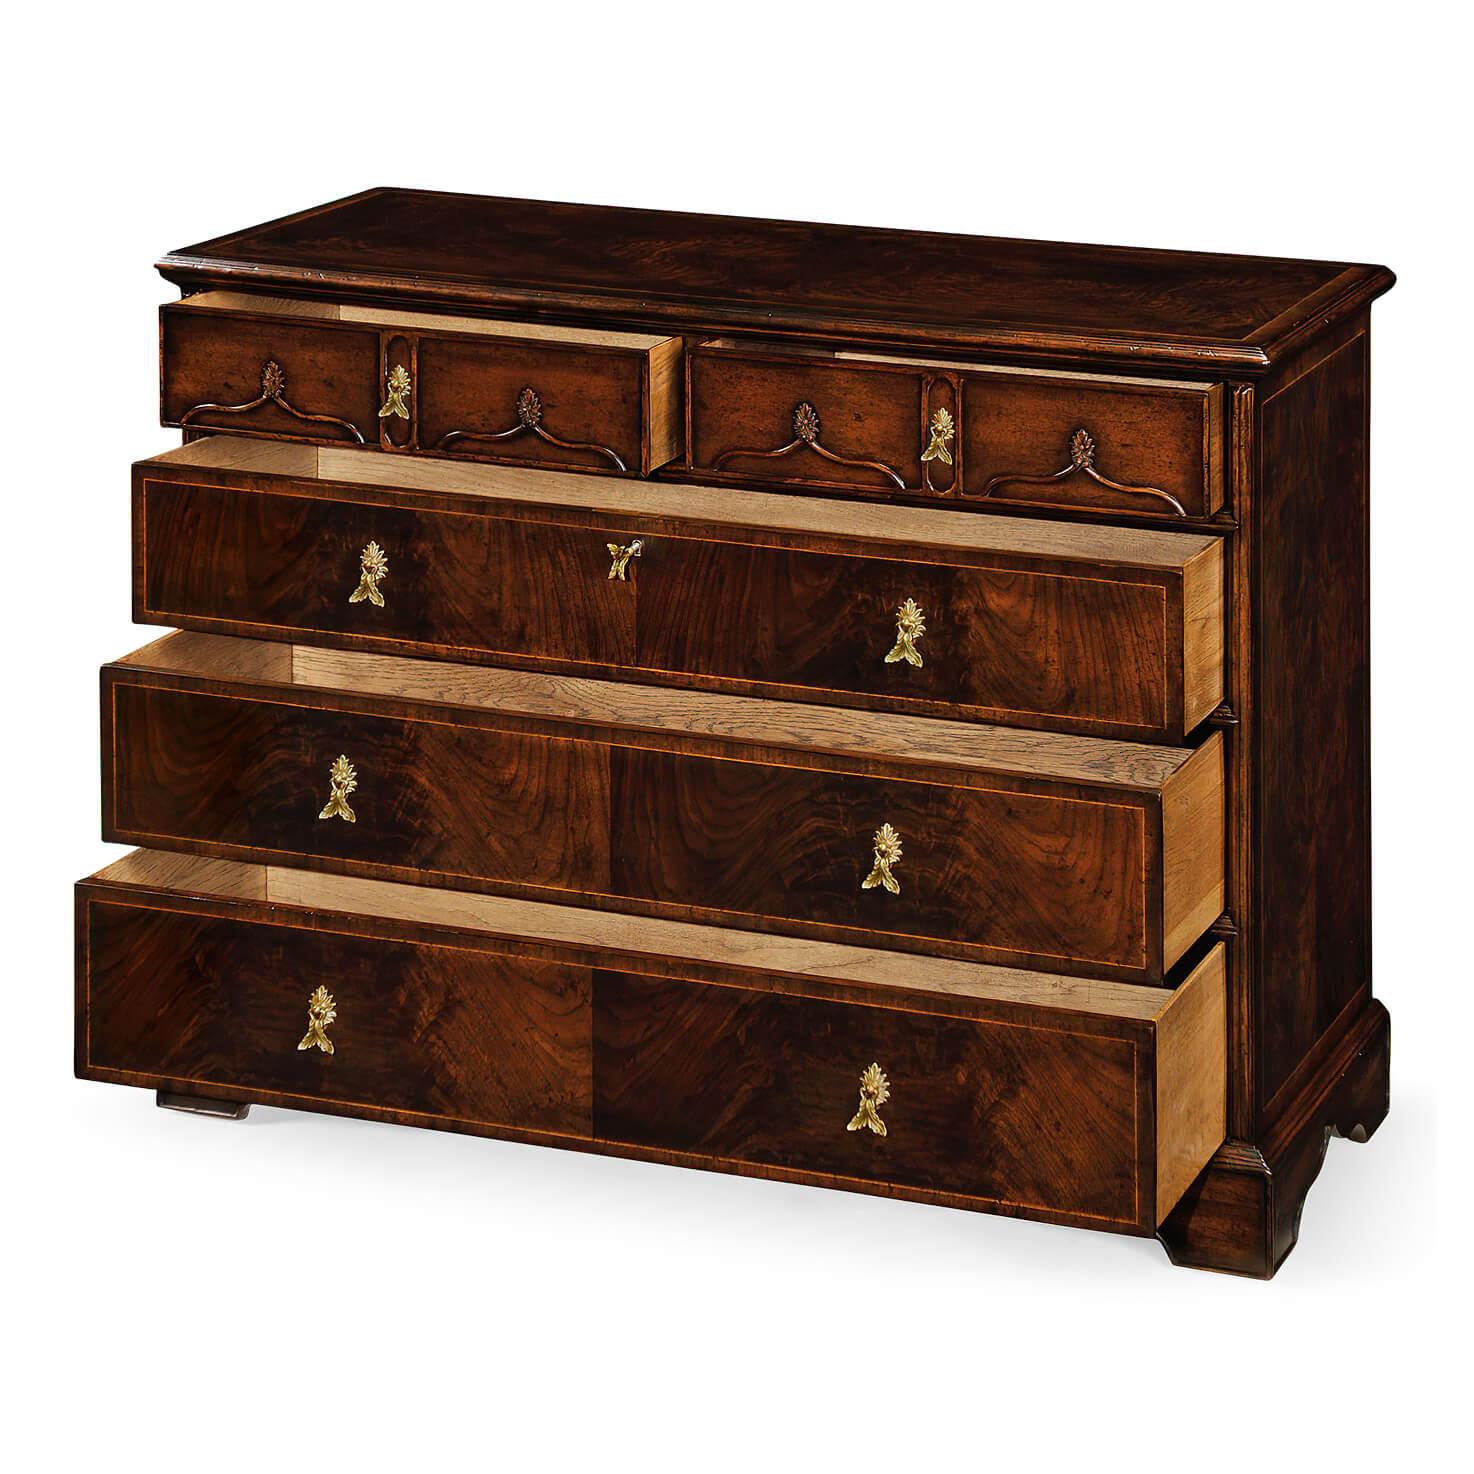 Chippendale gothic style large chest of five drawers with shallow carved ogee arches to the two top drawer fronts and with contrasting light stringing inlay. Finely cast brass handles. 

Dimensions: 48